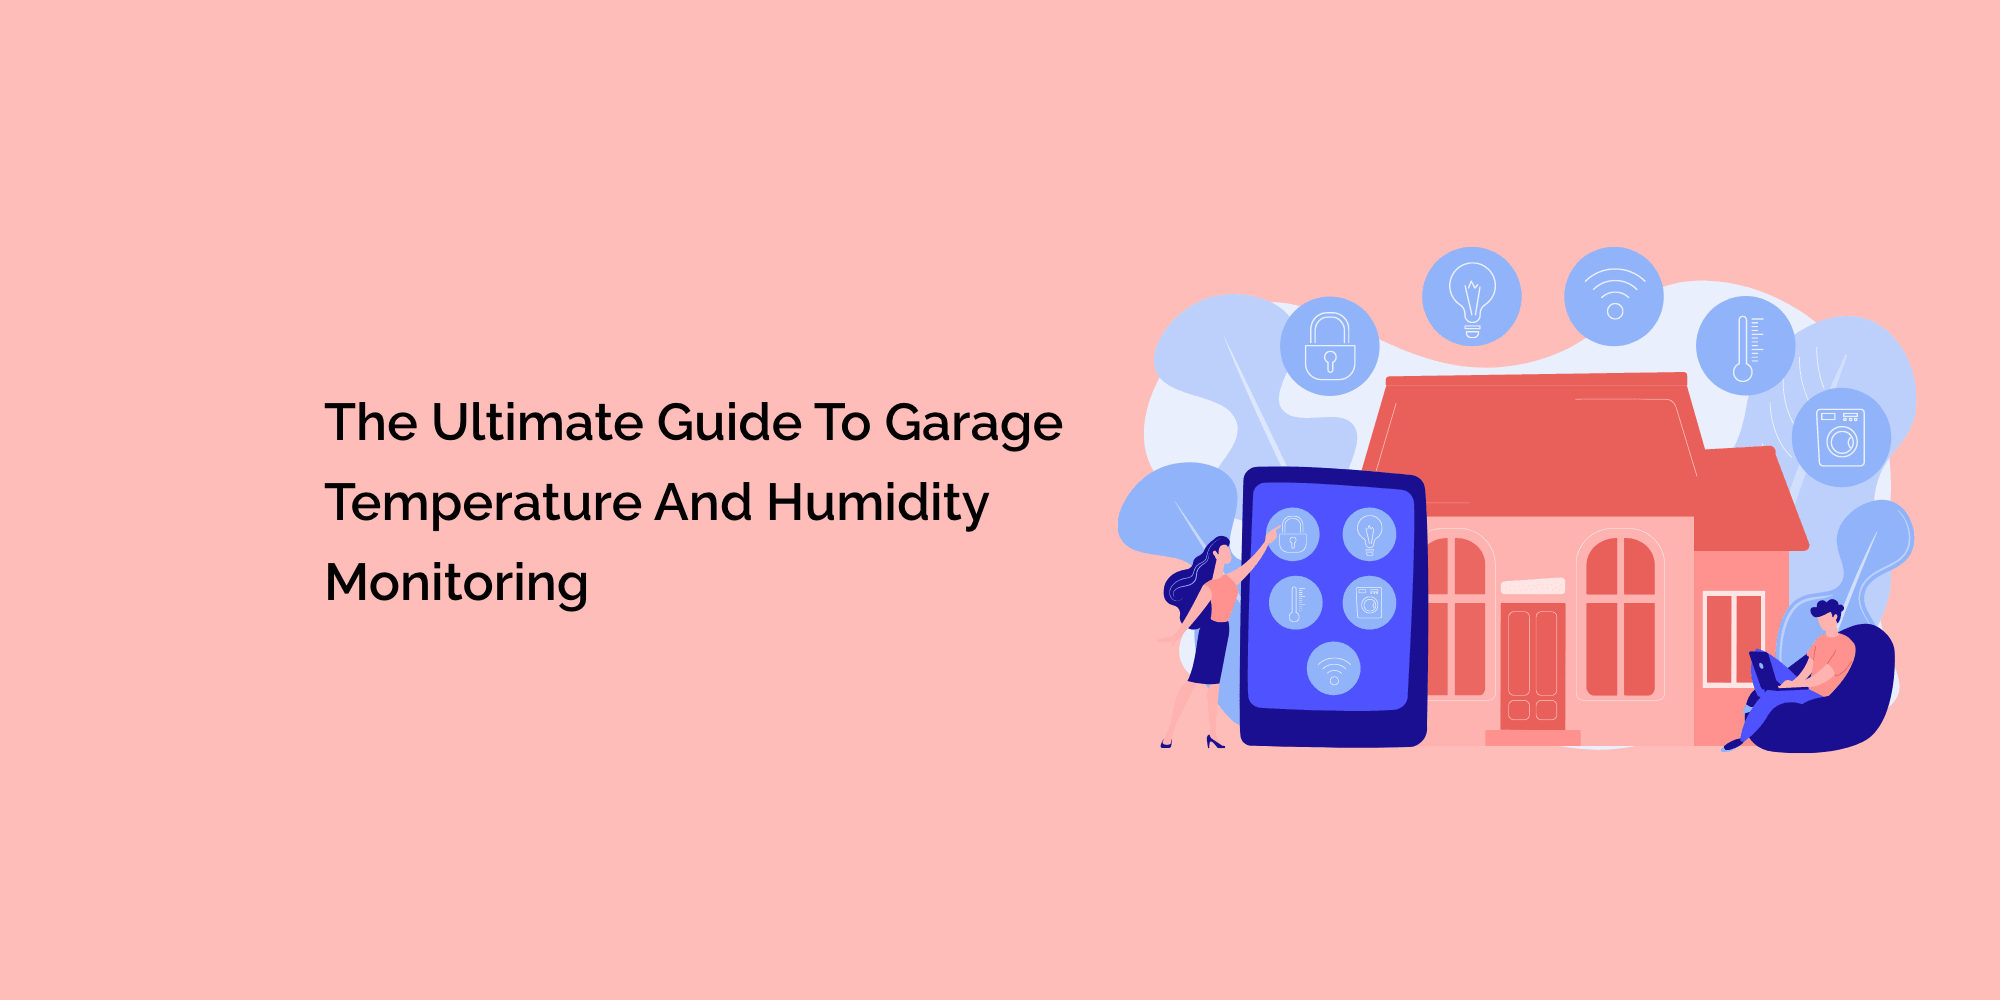 The Ultimate Guide to Garage Temperature and Humidity Monitoring